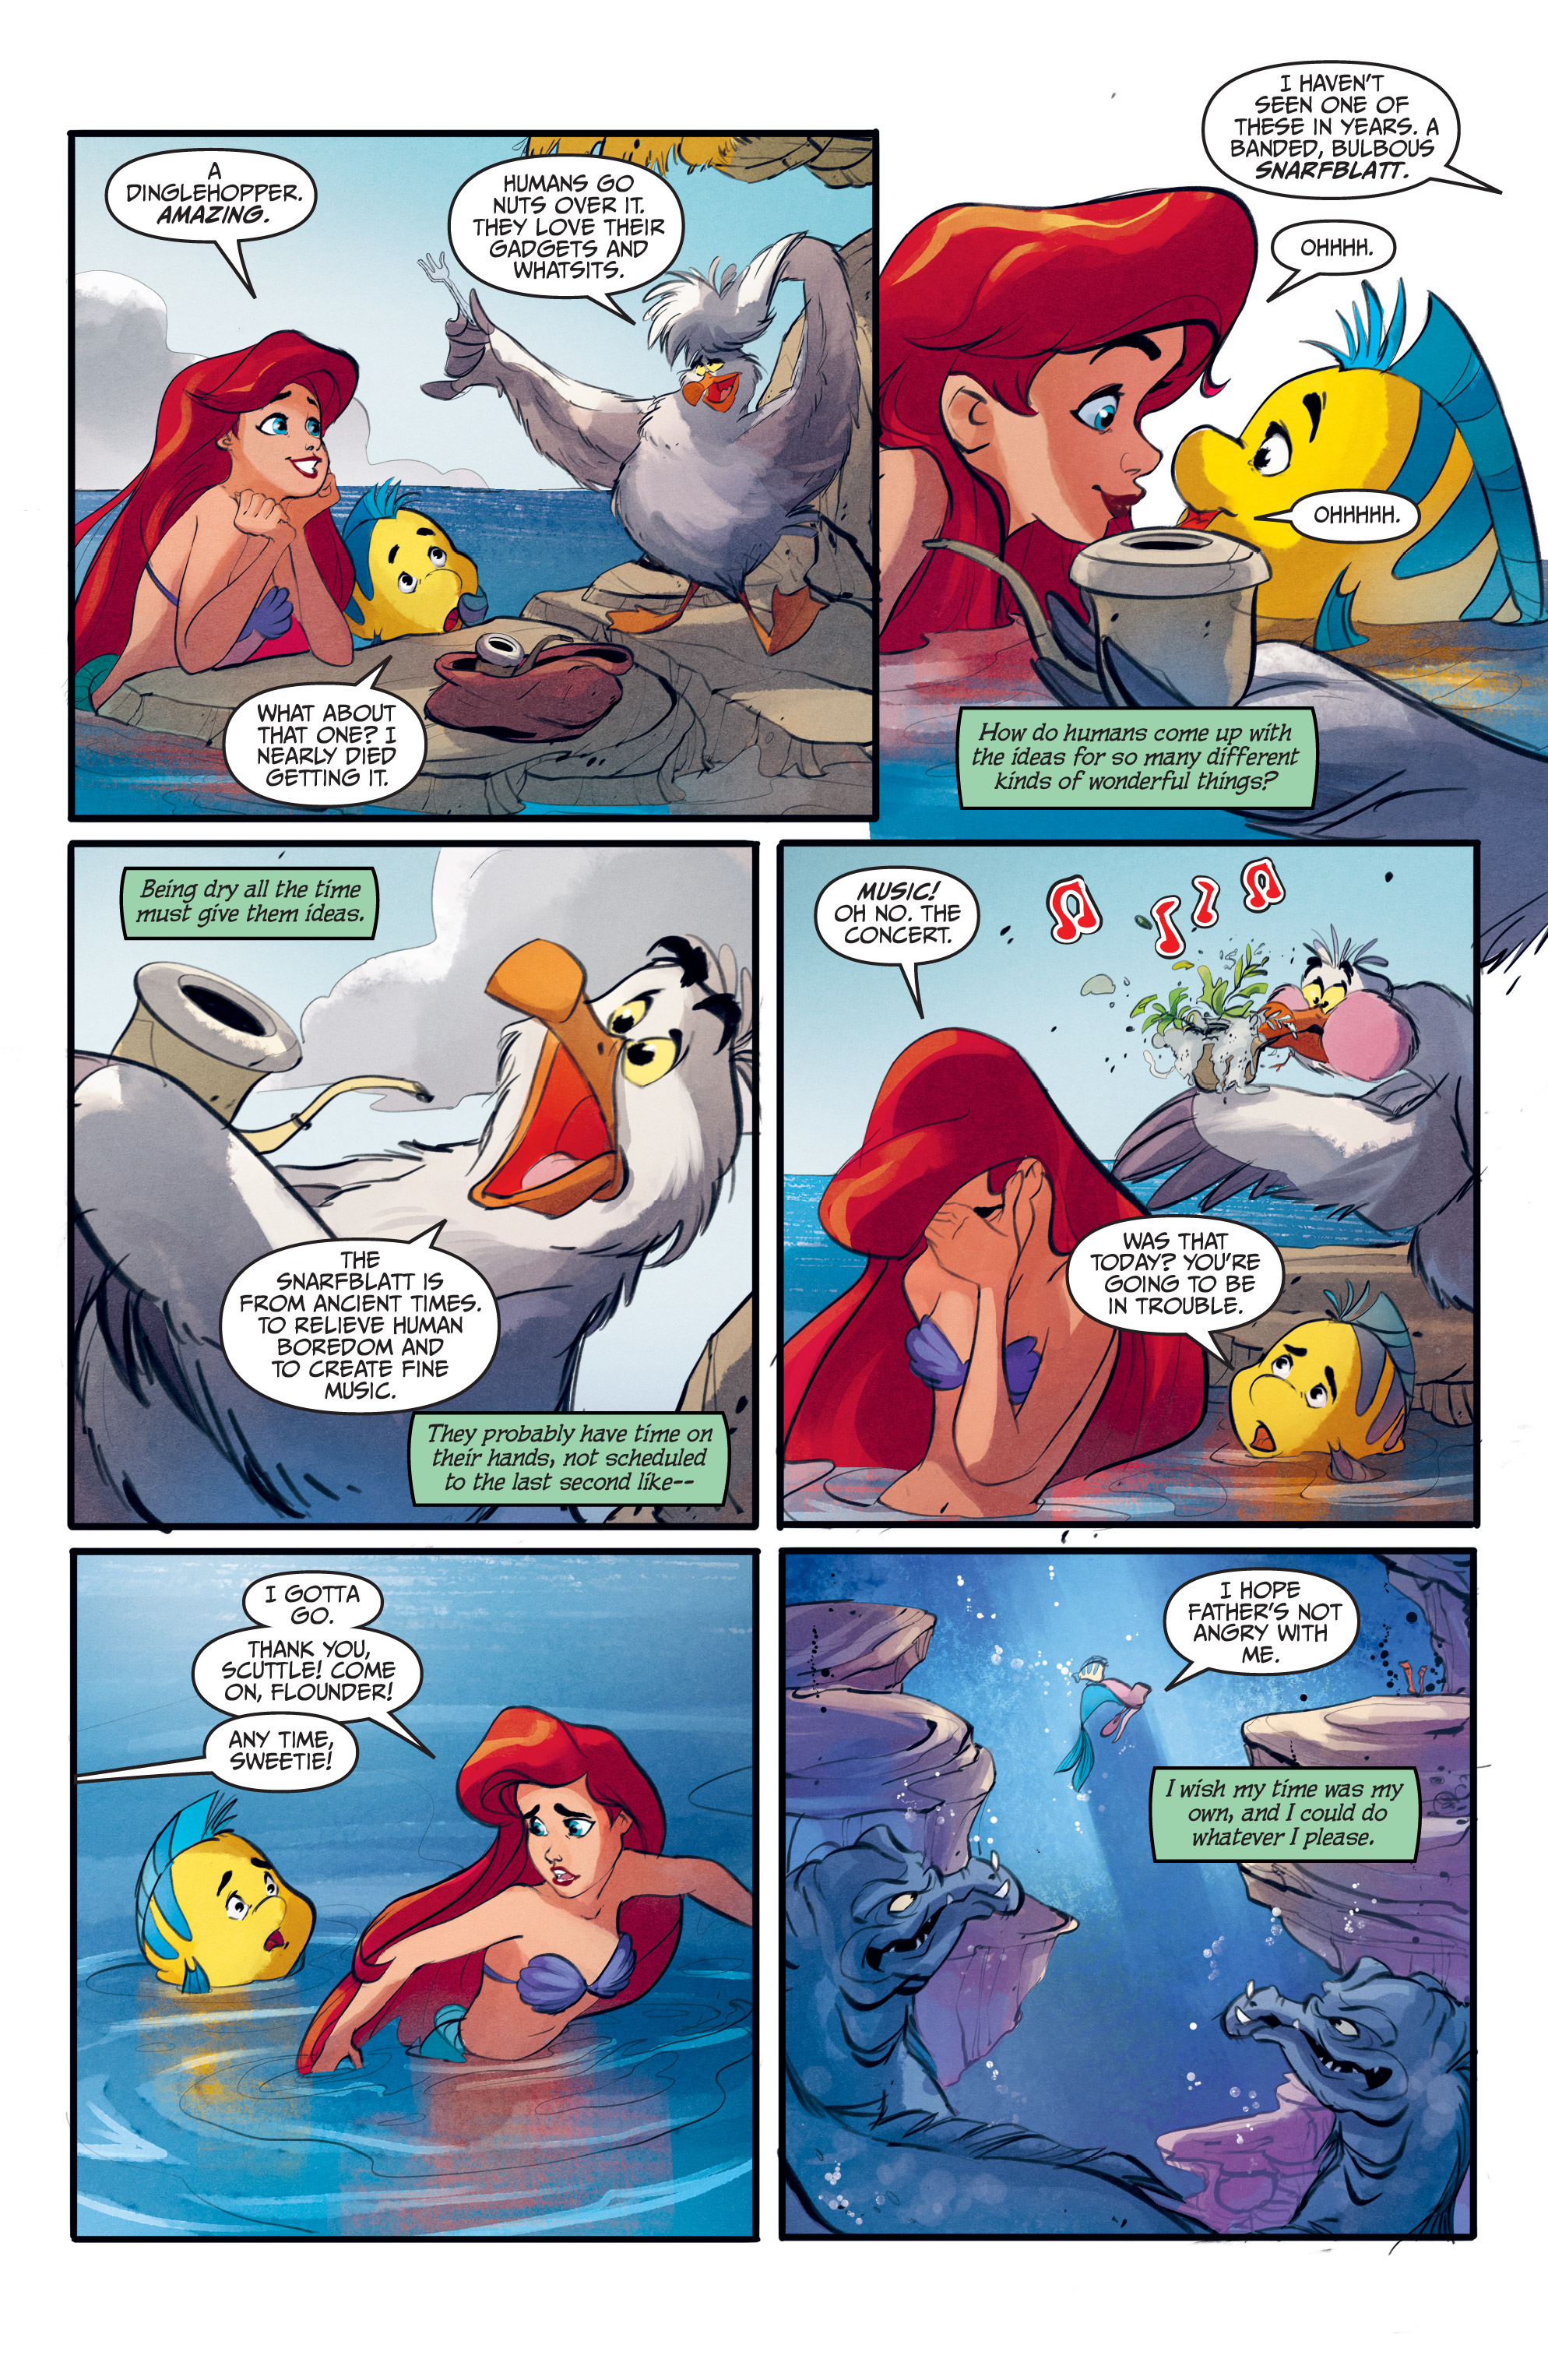 The Little Mermaid (2019-): Chapter 1 - Page 7